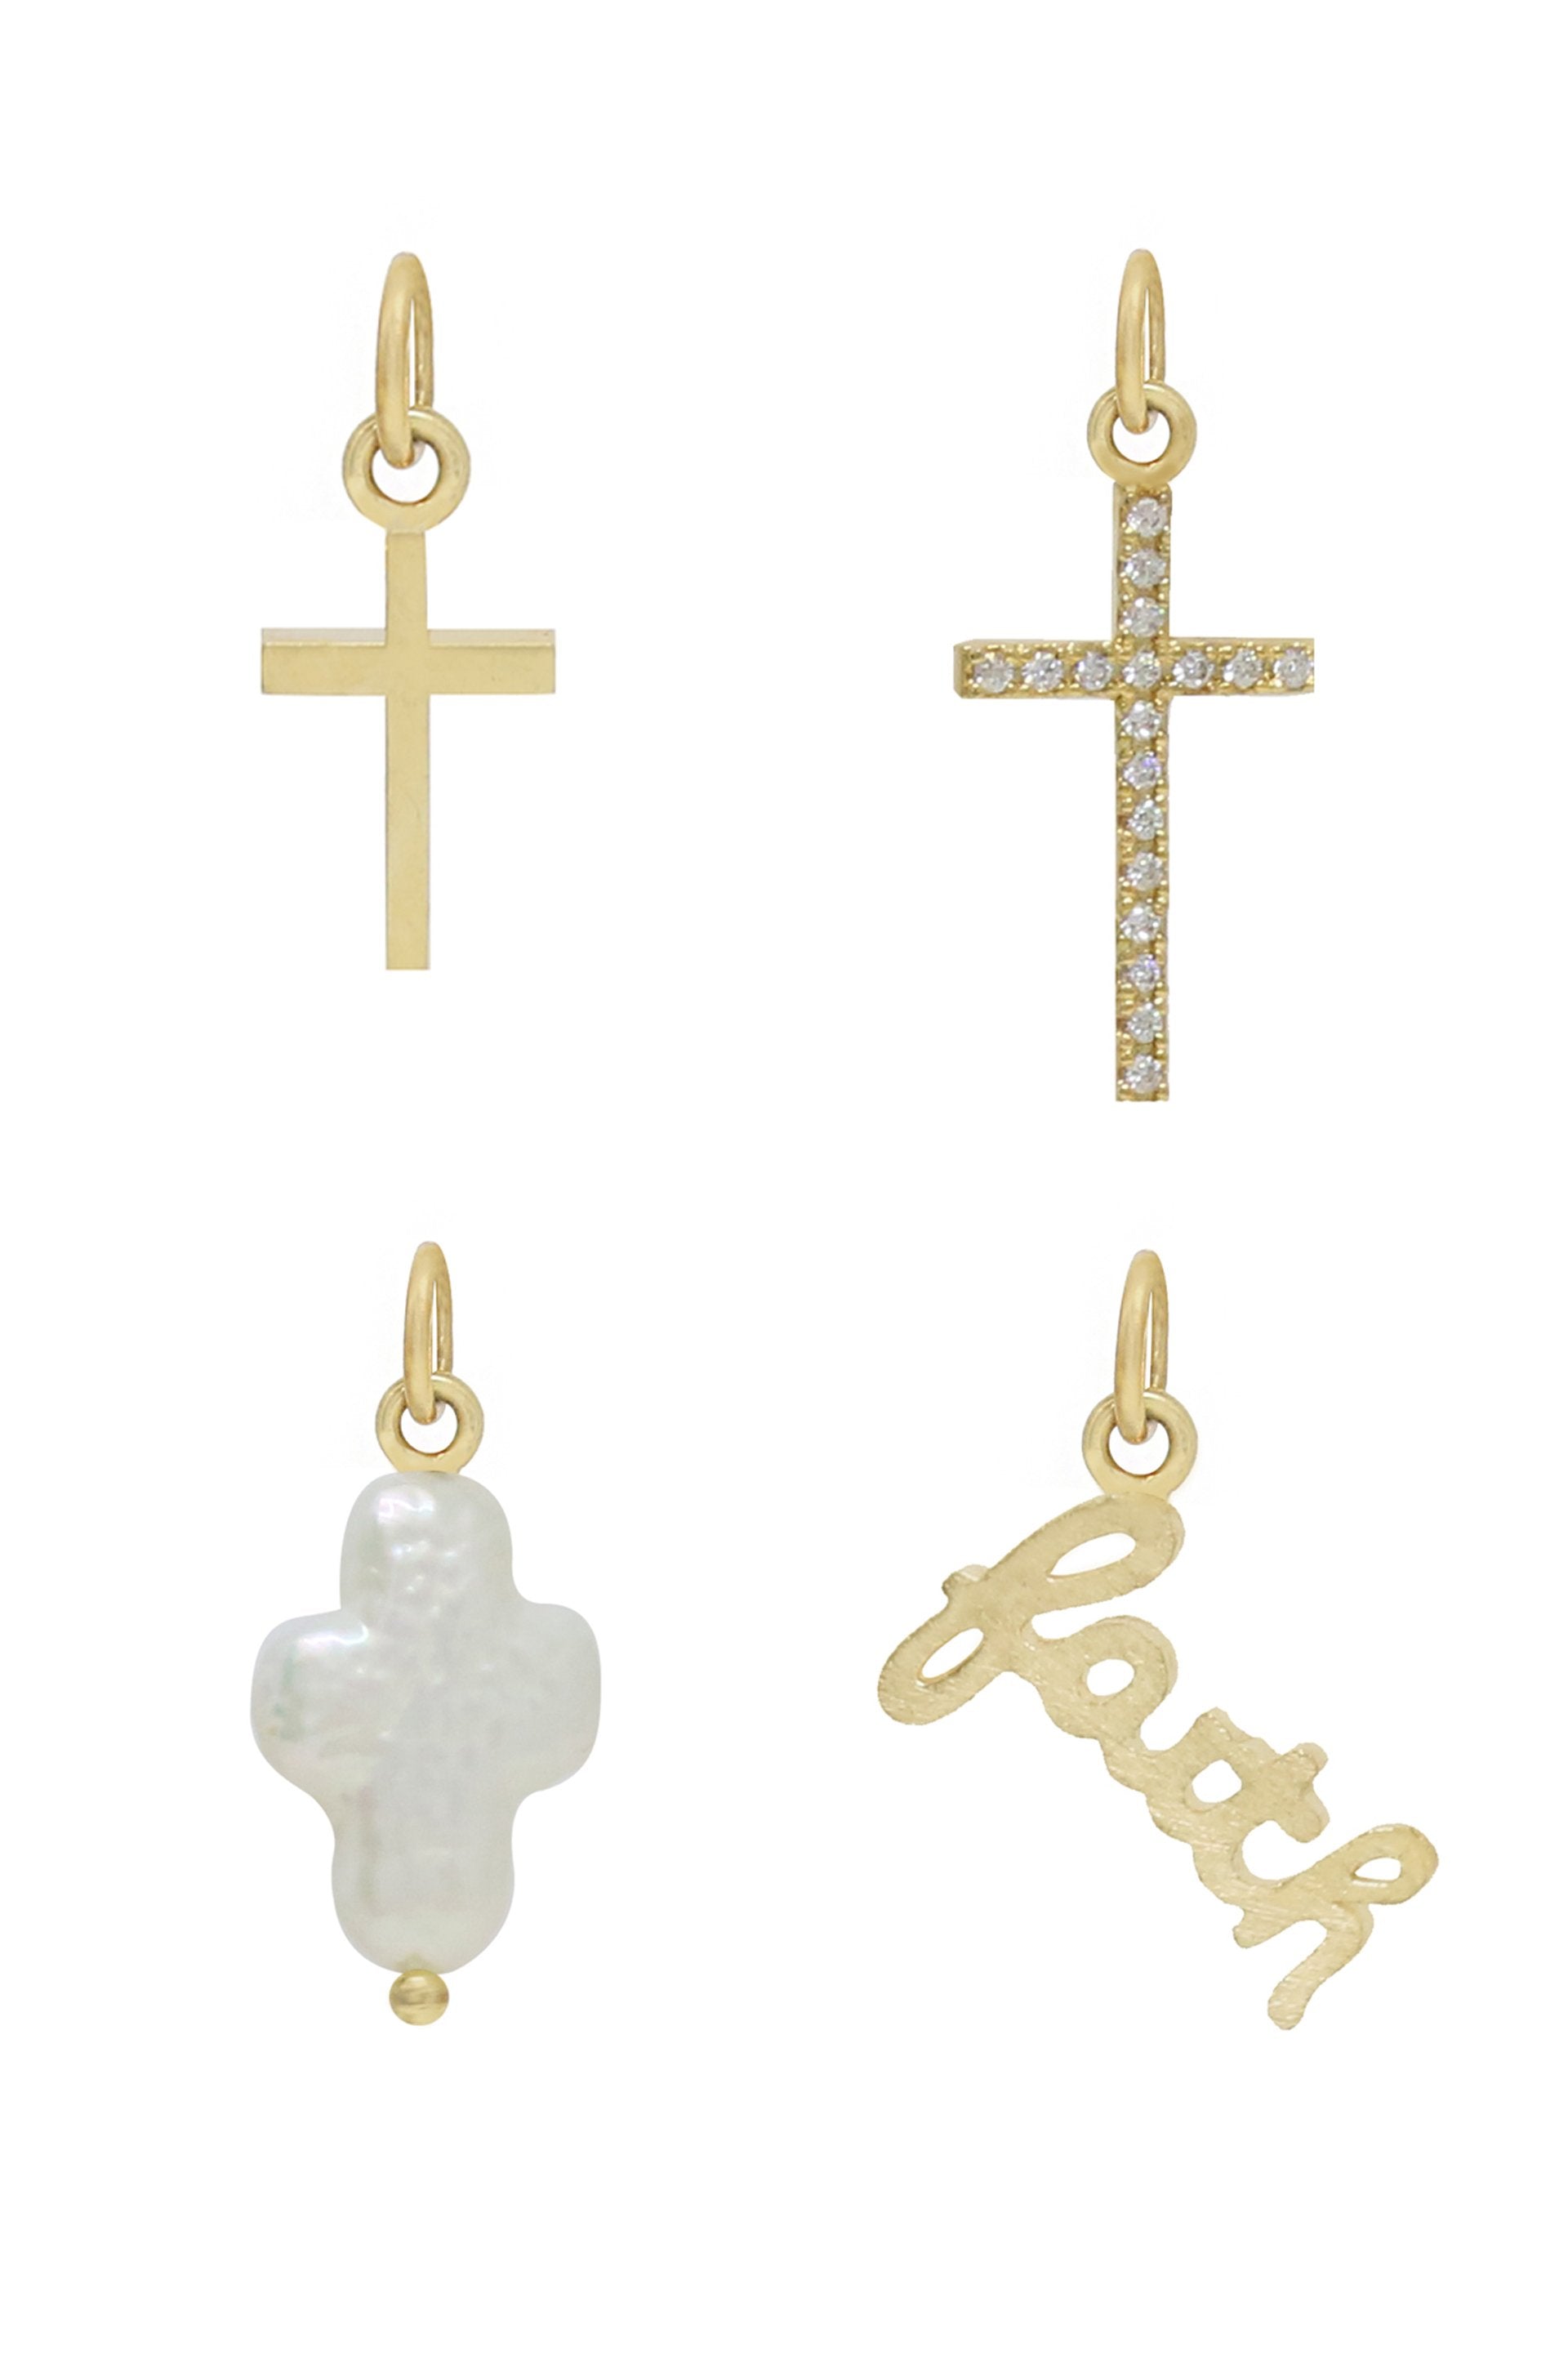 Gotta Have Faith 18k Gold Plated Interchangeable Charm Necklace on white background 2